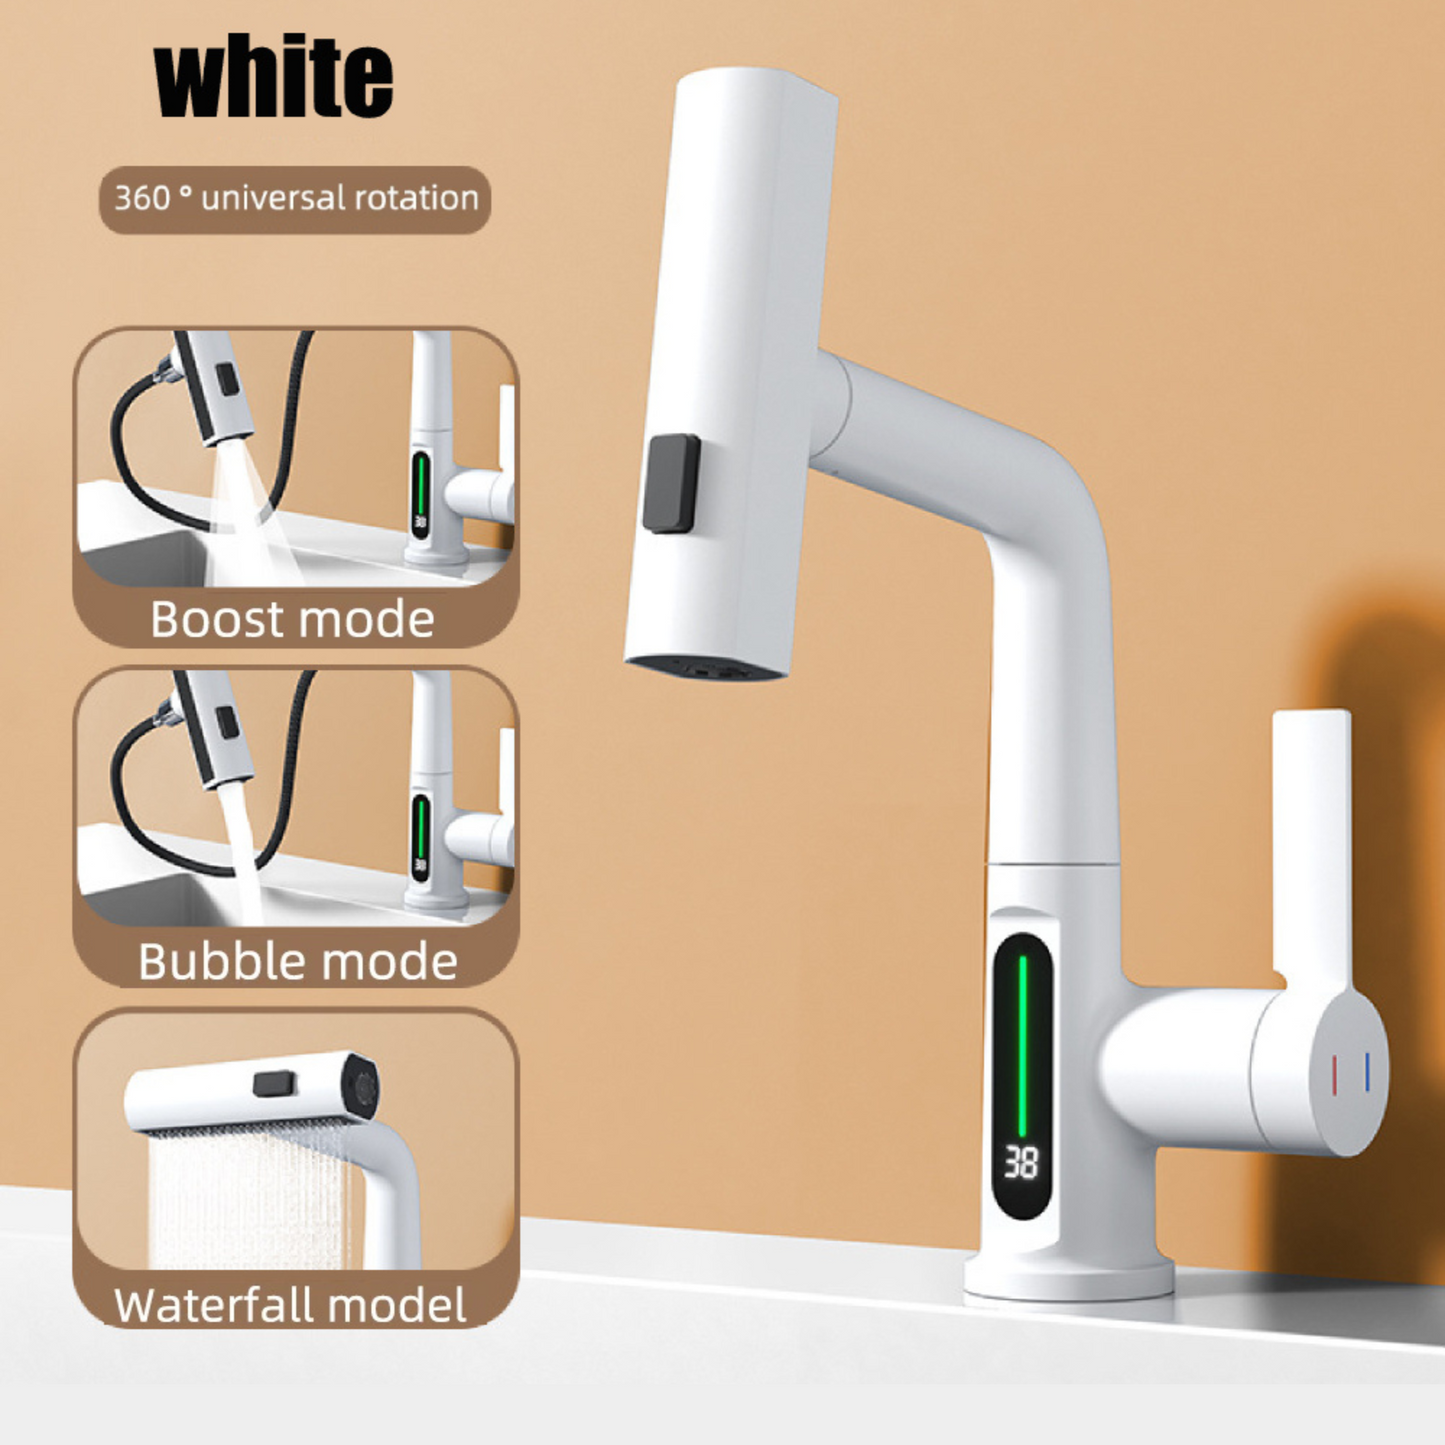 The Beta Essential Waterfall Faucet